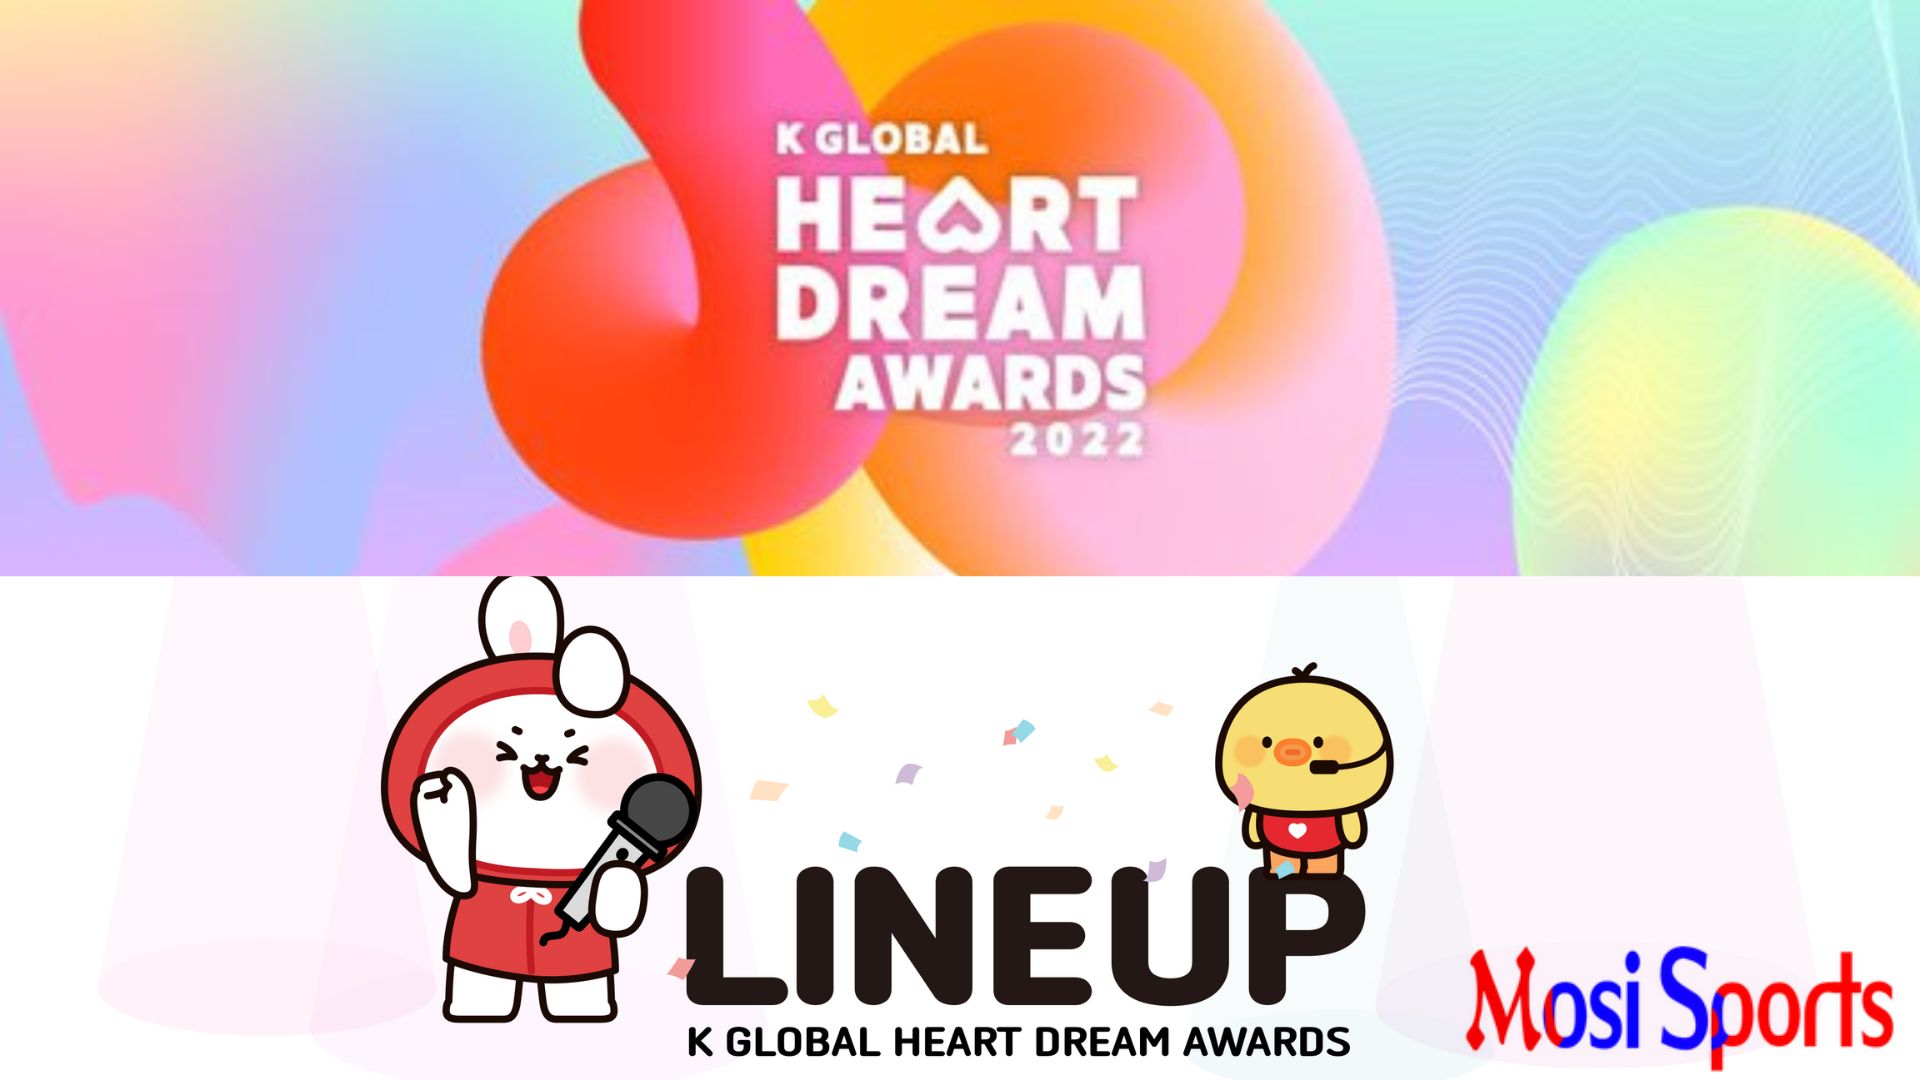 How to Watch 2022 K GLOBAL HEART DREAM AWARDS Live Stream